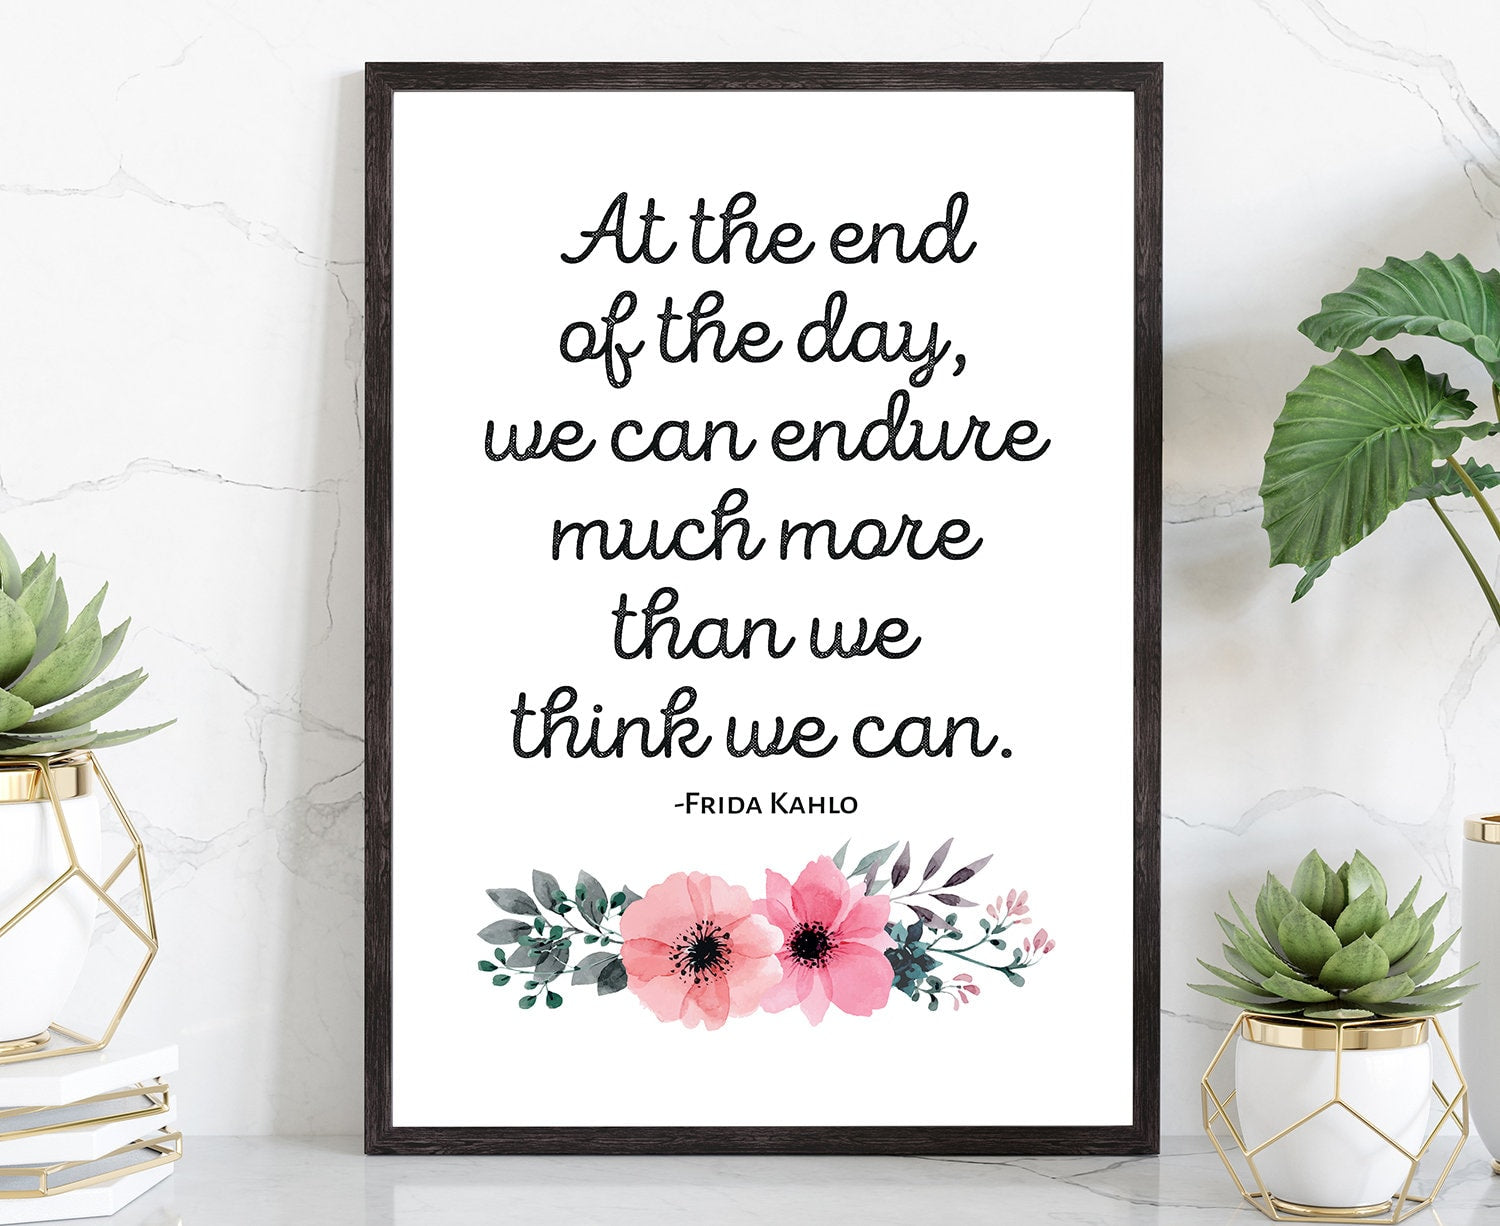 At the end of the day, Frida kahlo quotes, Poster prints, Inspirational quote prints, Motivational quote prints, Home wall art, Wall decor